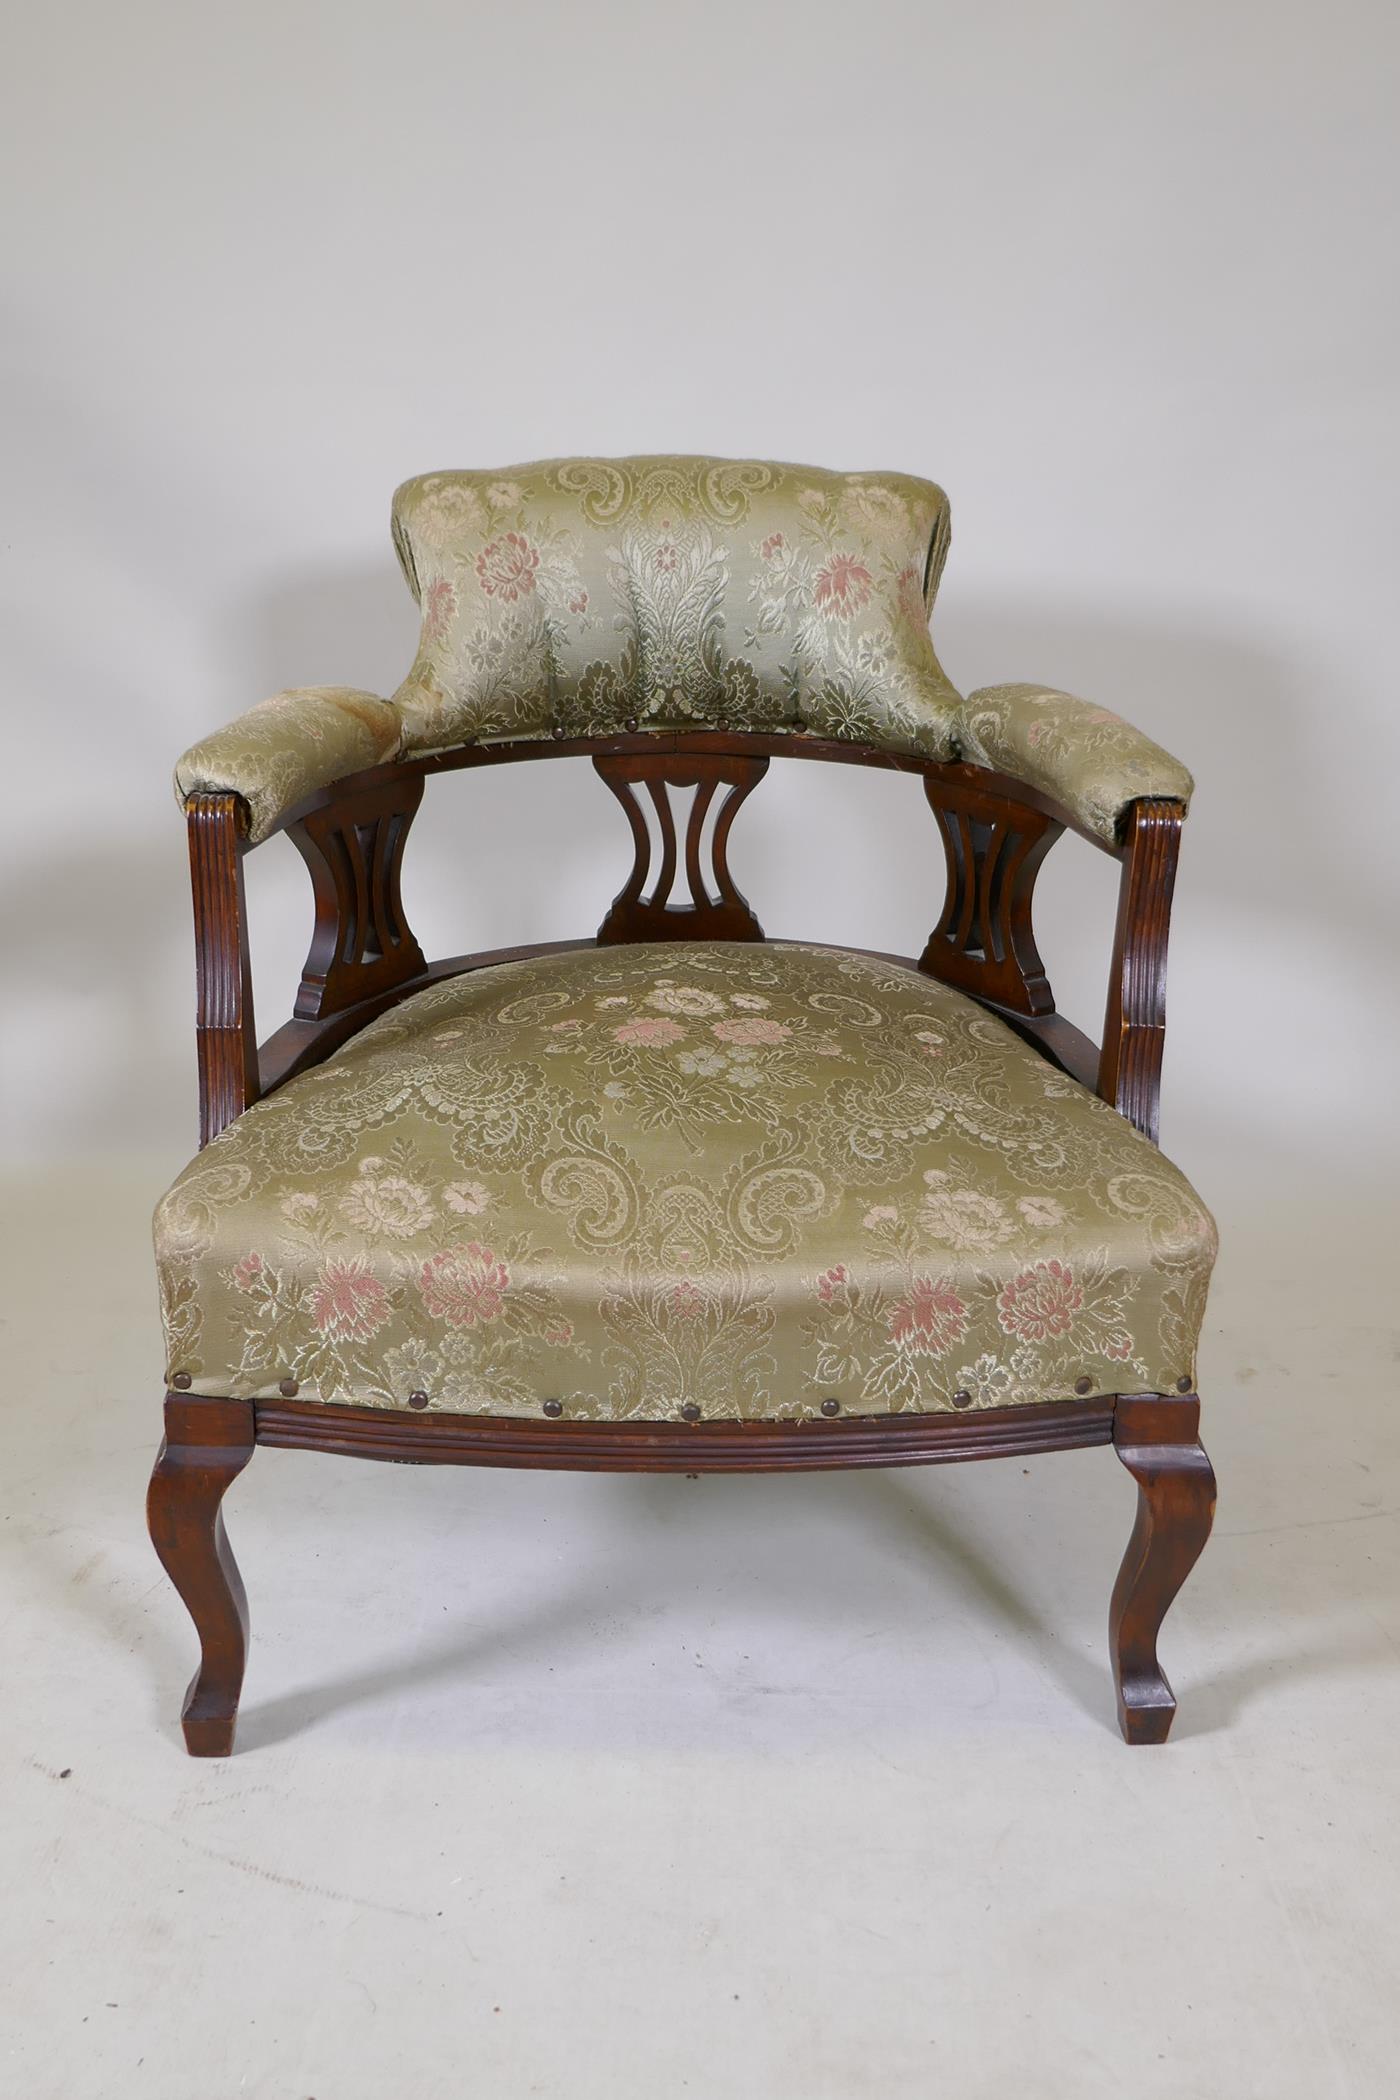 A C19th mahogany horseshoe back armchair on cabriole supports - Image 2 of 3